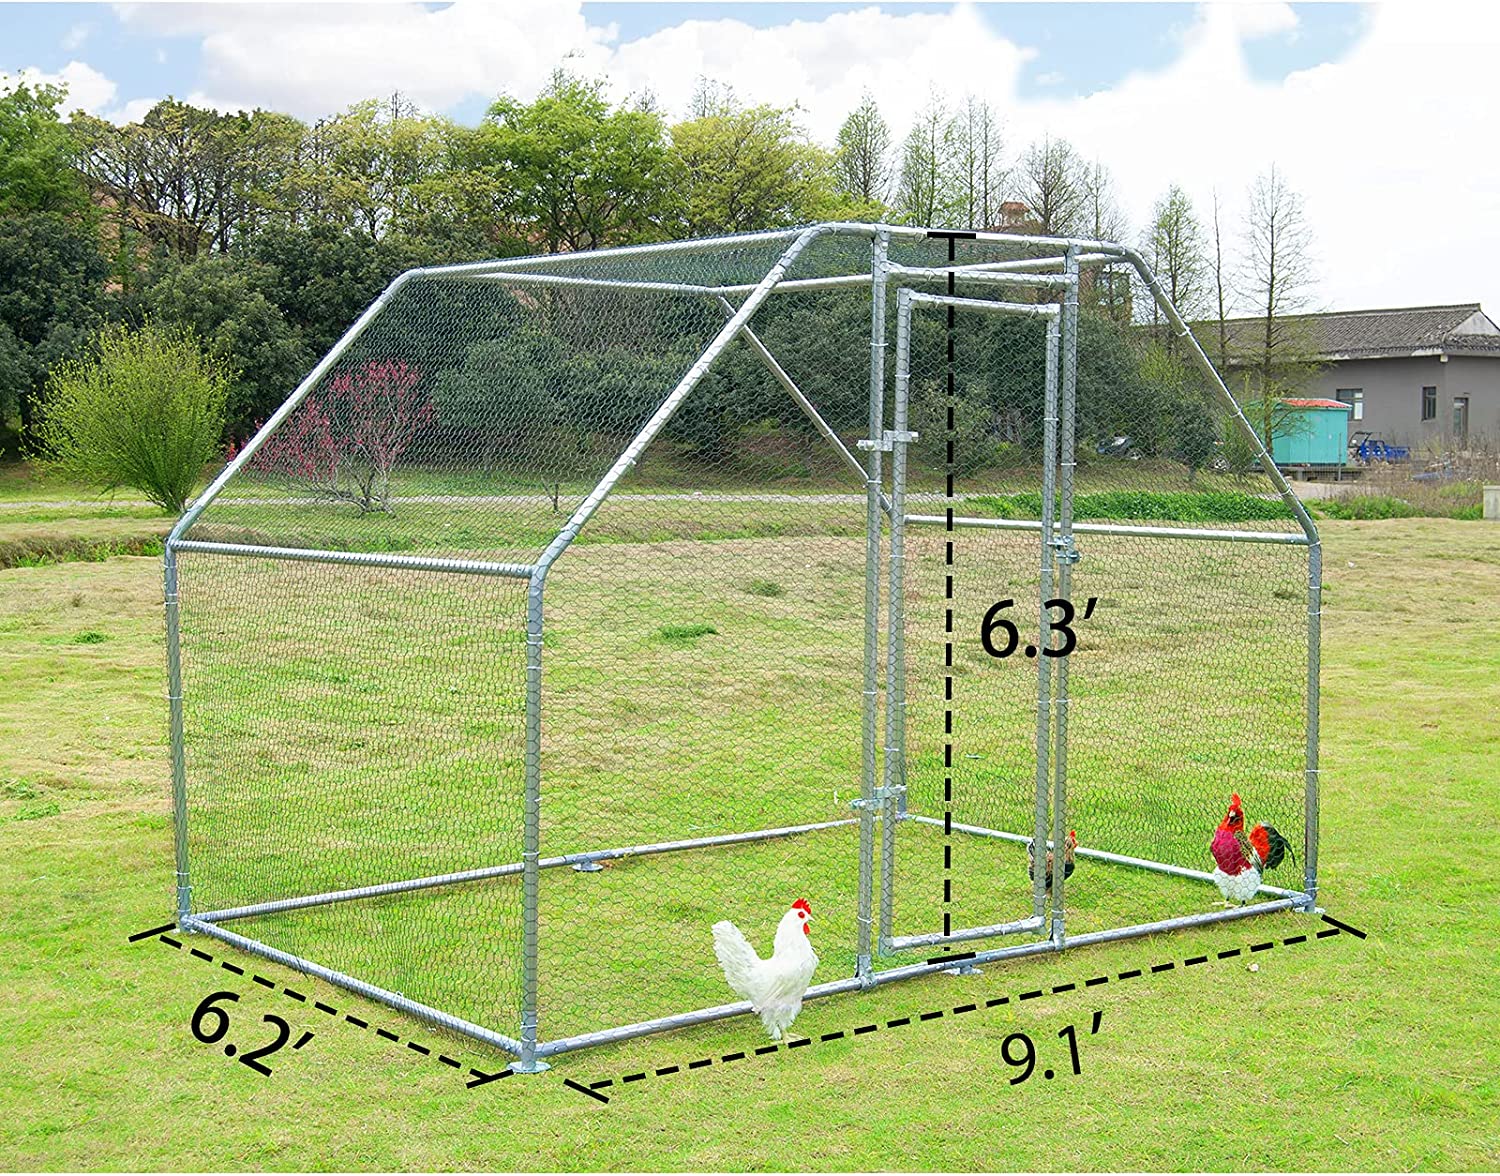 Large Metal Chicken Coop With Waterproof UV Protection Cover